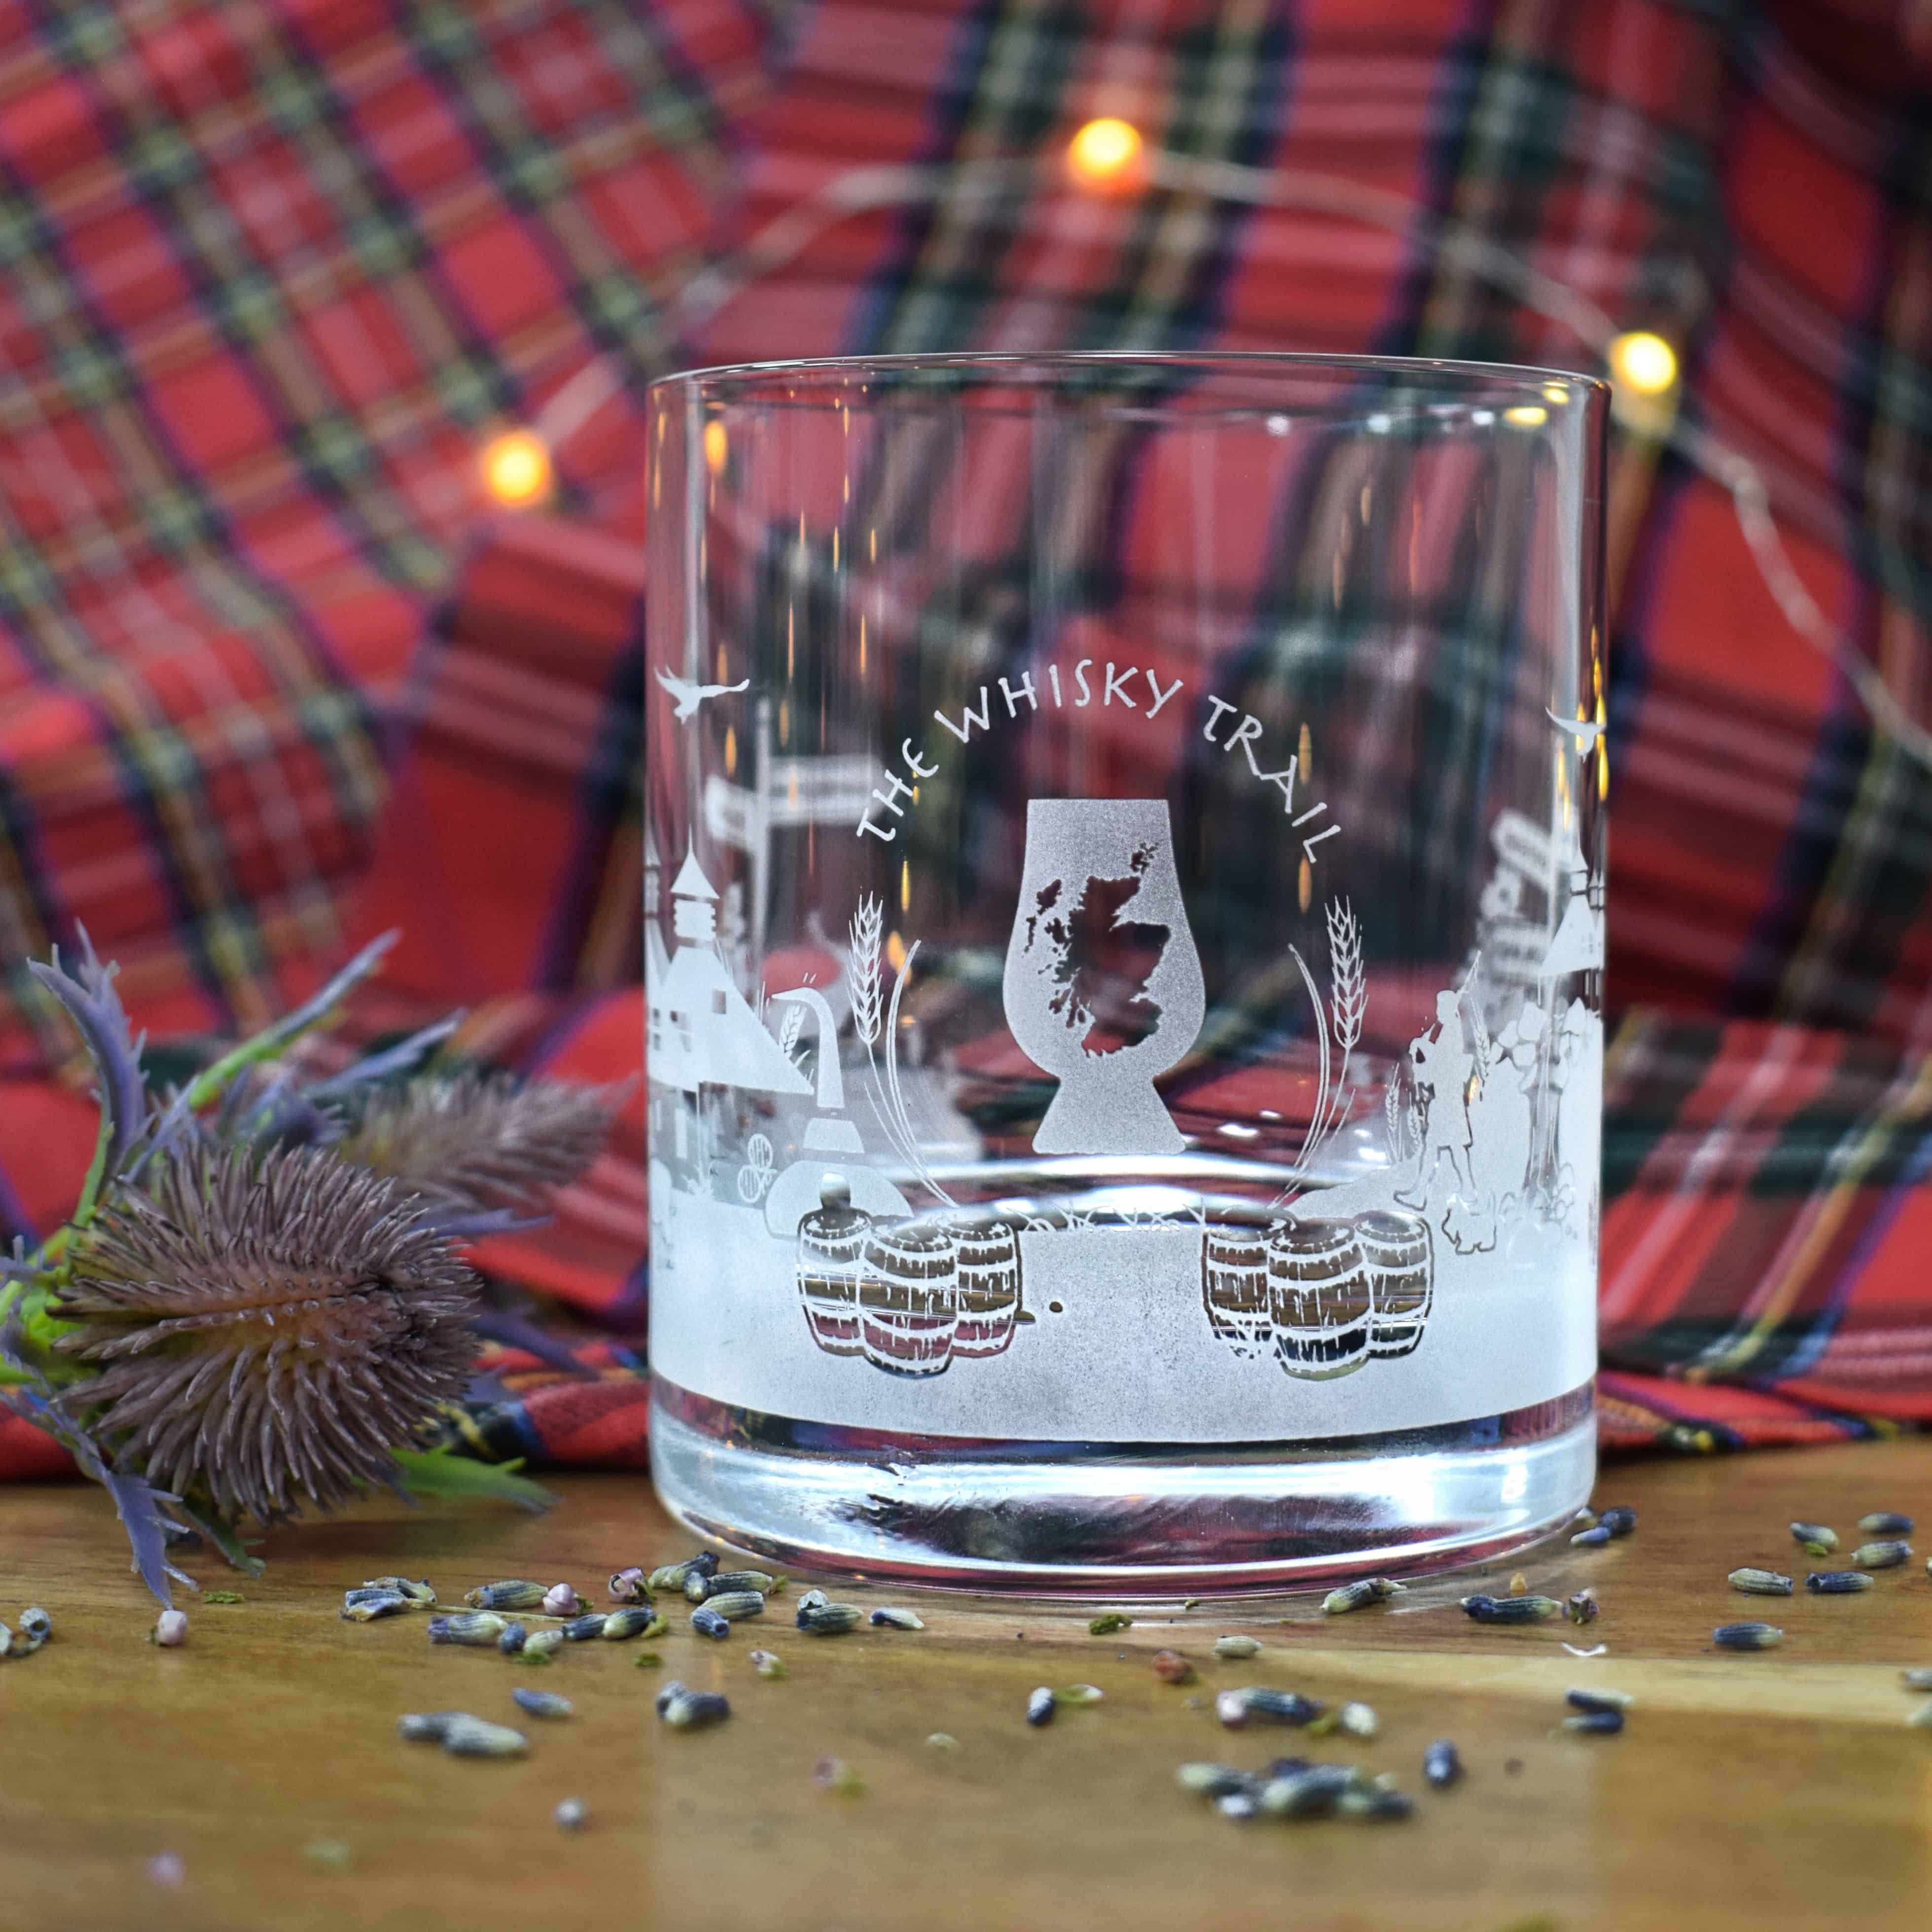 Glencairn Crystal Have you been looking for special gifts for whisky lovers? You can now look no further with this wrap-around skyline design of the Whisky Trail on a crystal tumbler. It can be used for any beverage from water to whisky and is supplied in a navy windowed carton, perfect for gifting.